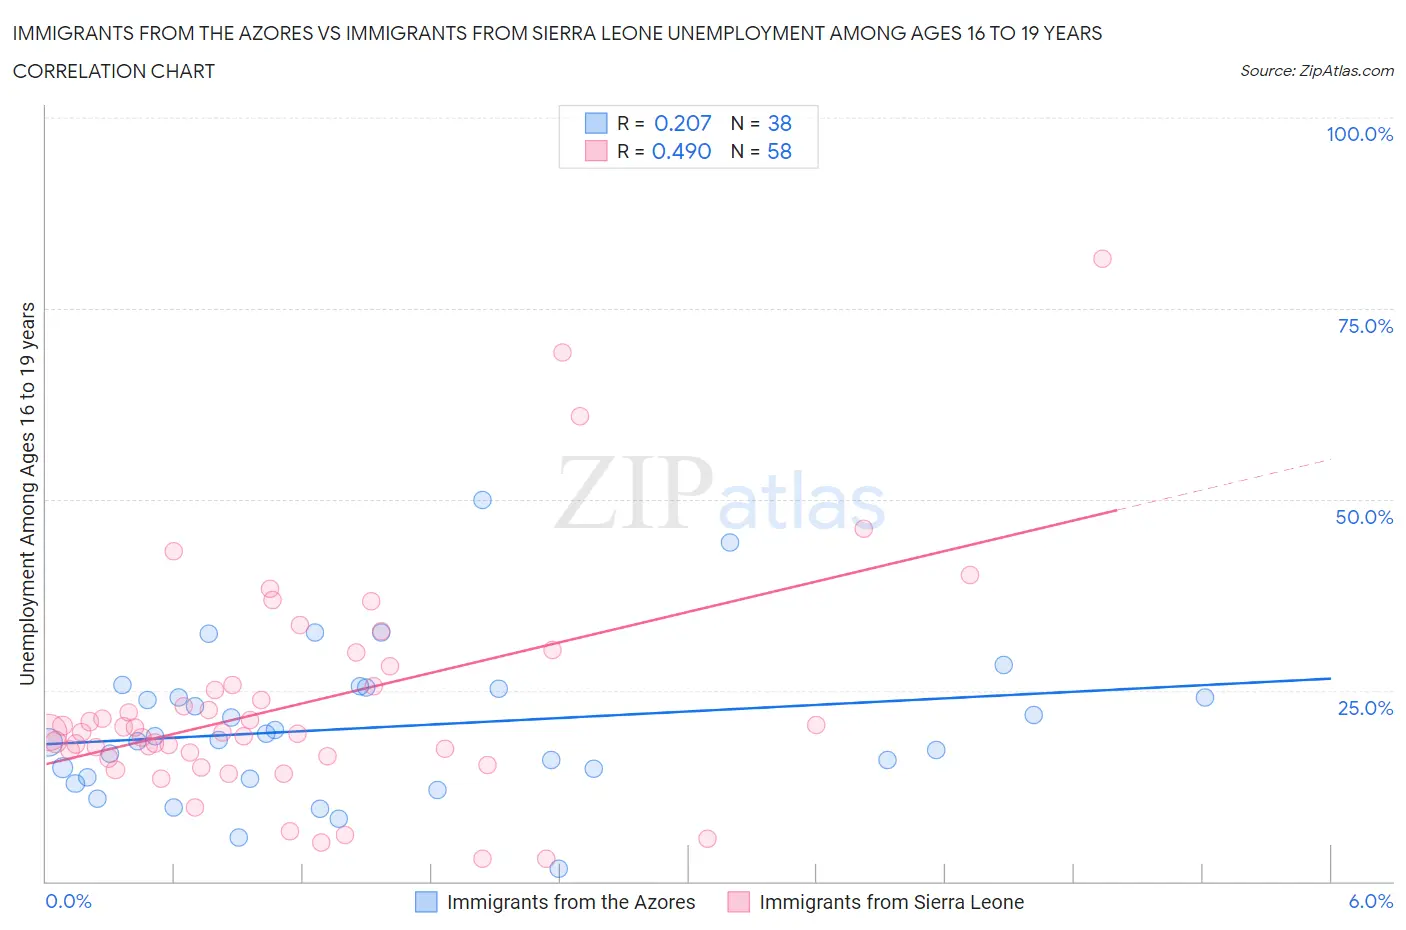 Immigrants from the Azores vs Immigrants from Sierra Leone Unemployment Among Ages 16 to 19 years